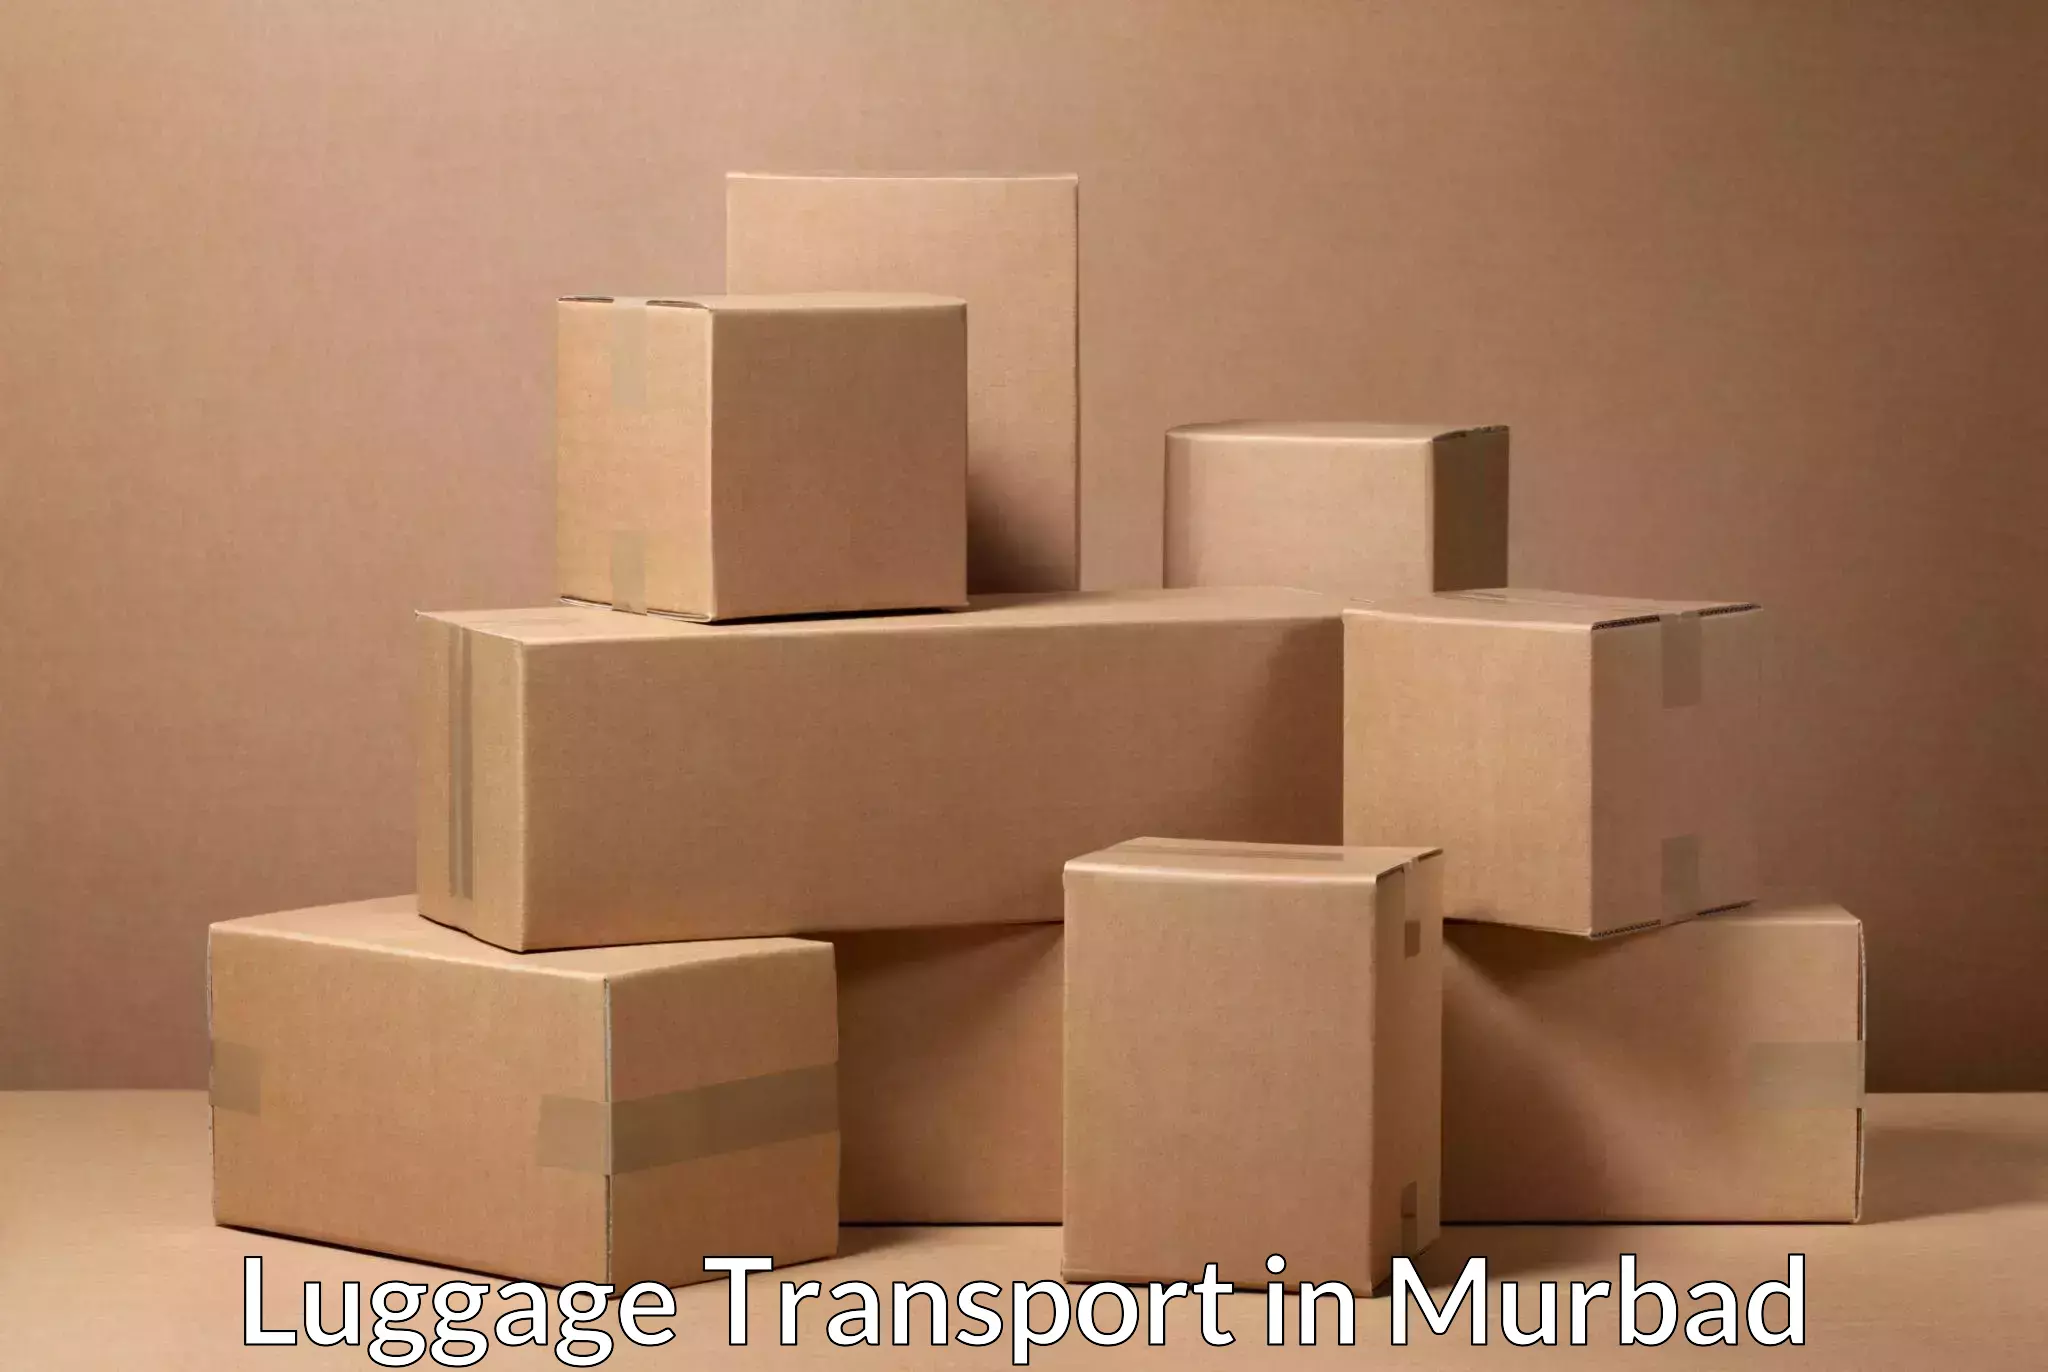 Luggage shipment tracking in Murbad